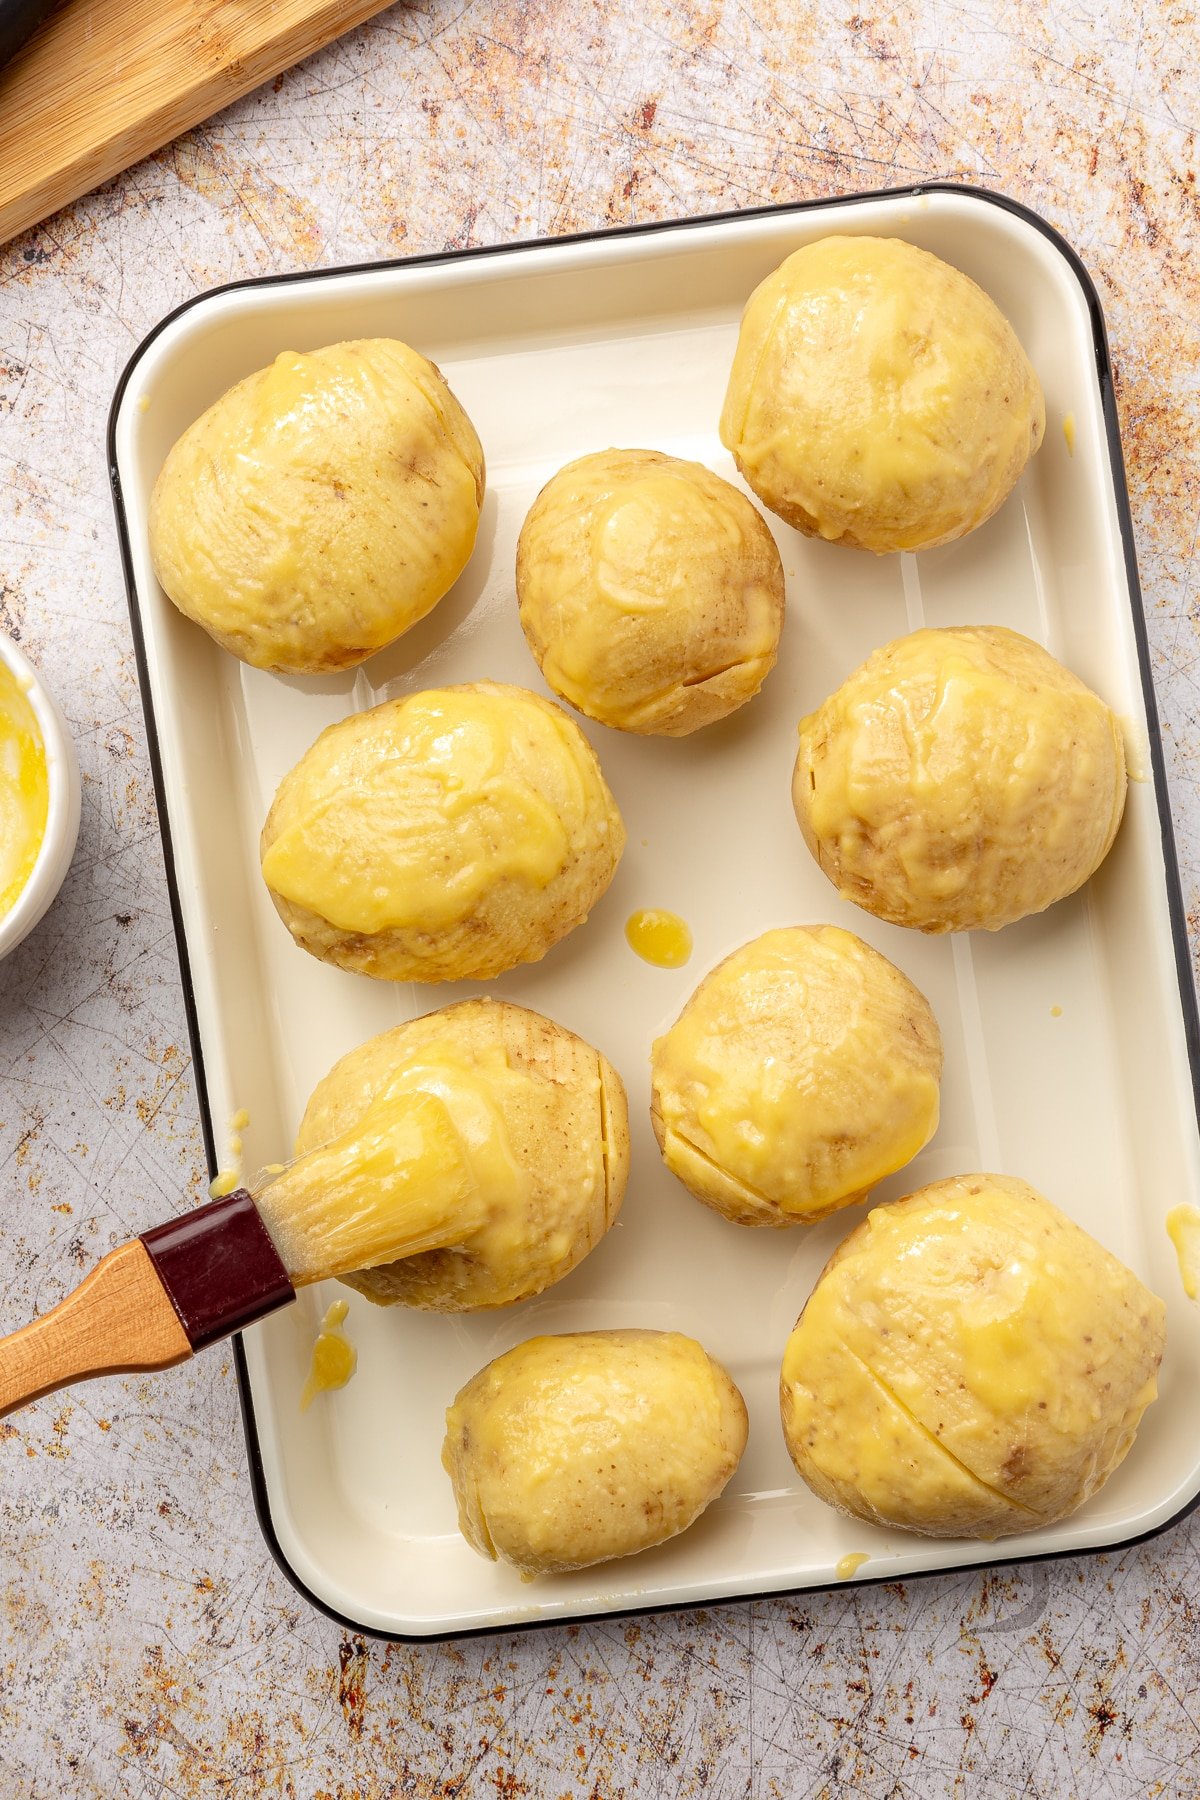 Sliced potatoes sit on a baking pan. A brush is shown dressing them in a thick yellow sauce.